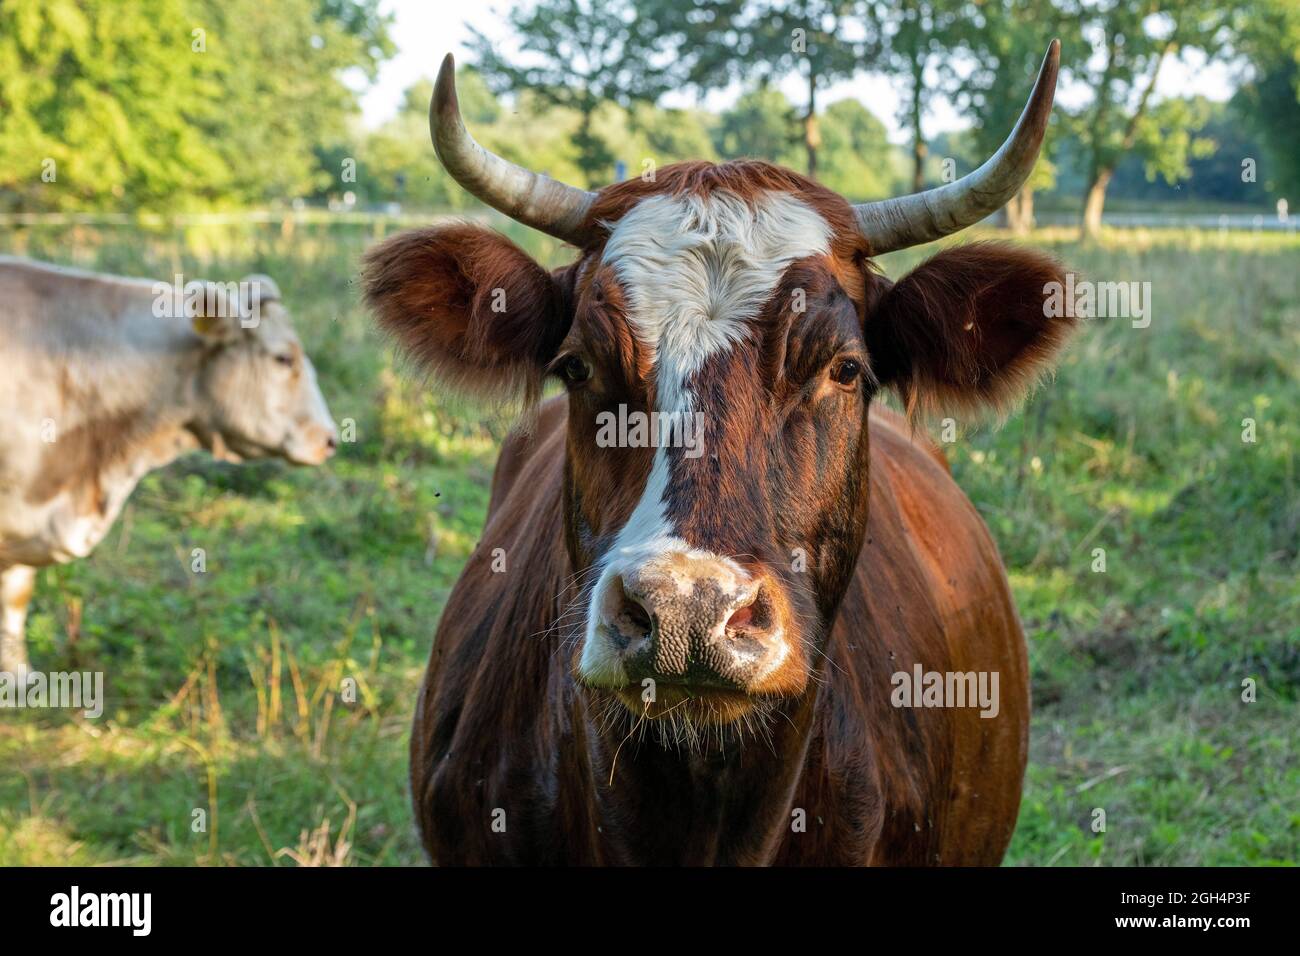 cows on a meadow, Garstedt, Lower Saxony, Germany Stock Photo